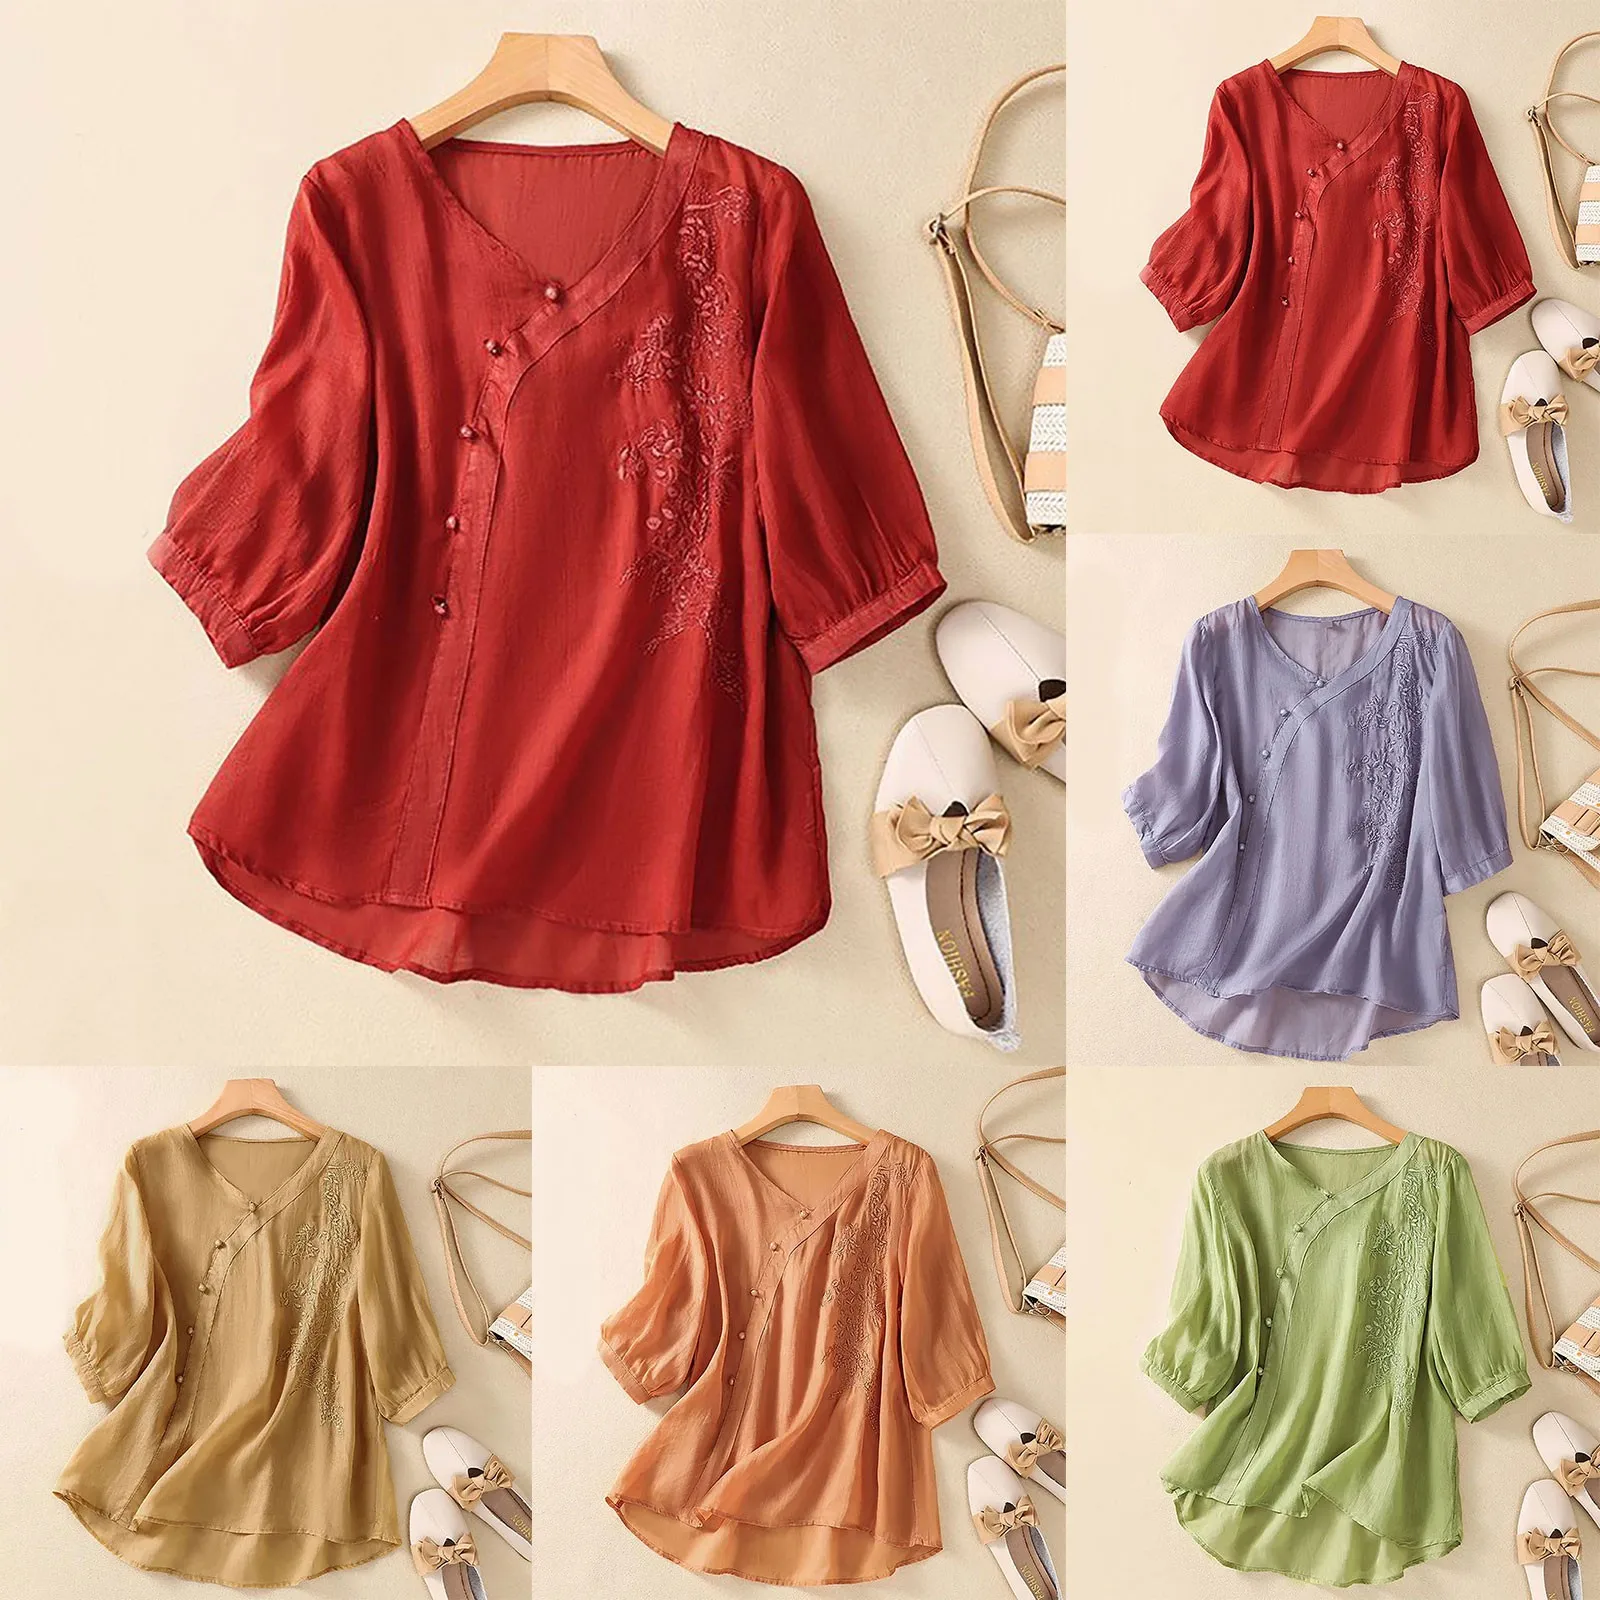 

Women's Literature Retro Style Shirt Long Sleeved Plain Loose Adult Simple Tops Fashion Cotton And Linen Embroidery Loose Shirts